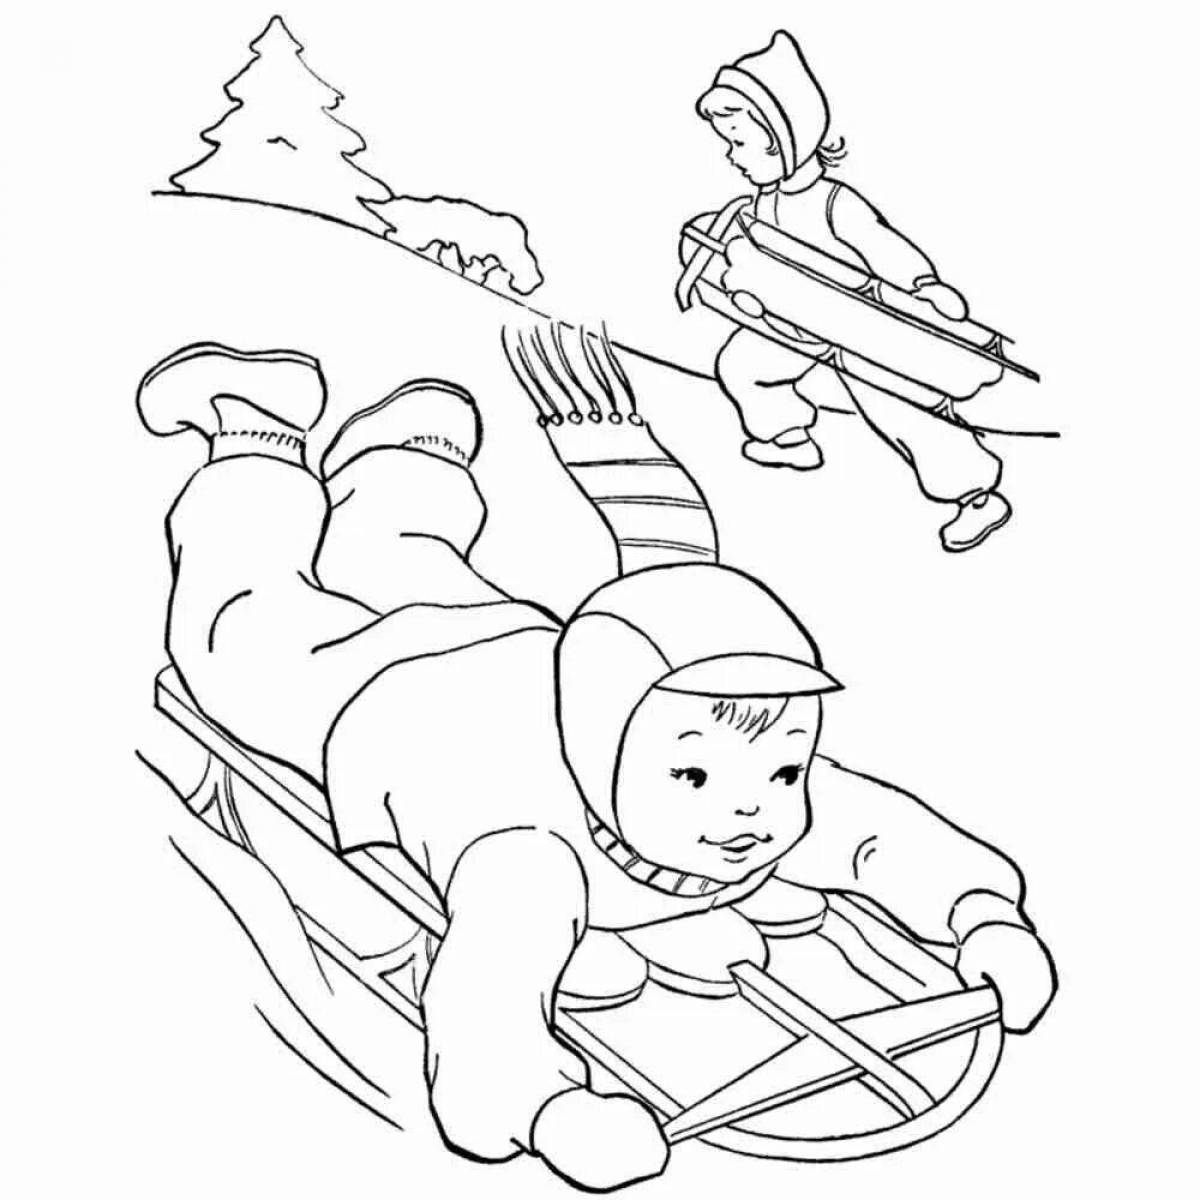 Adorable children's sled coloring book